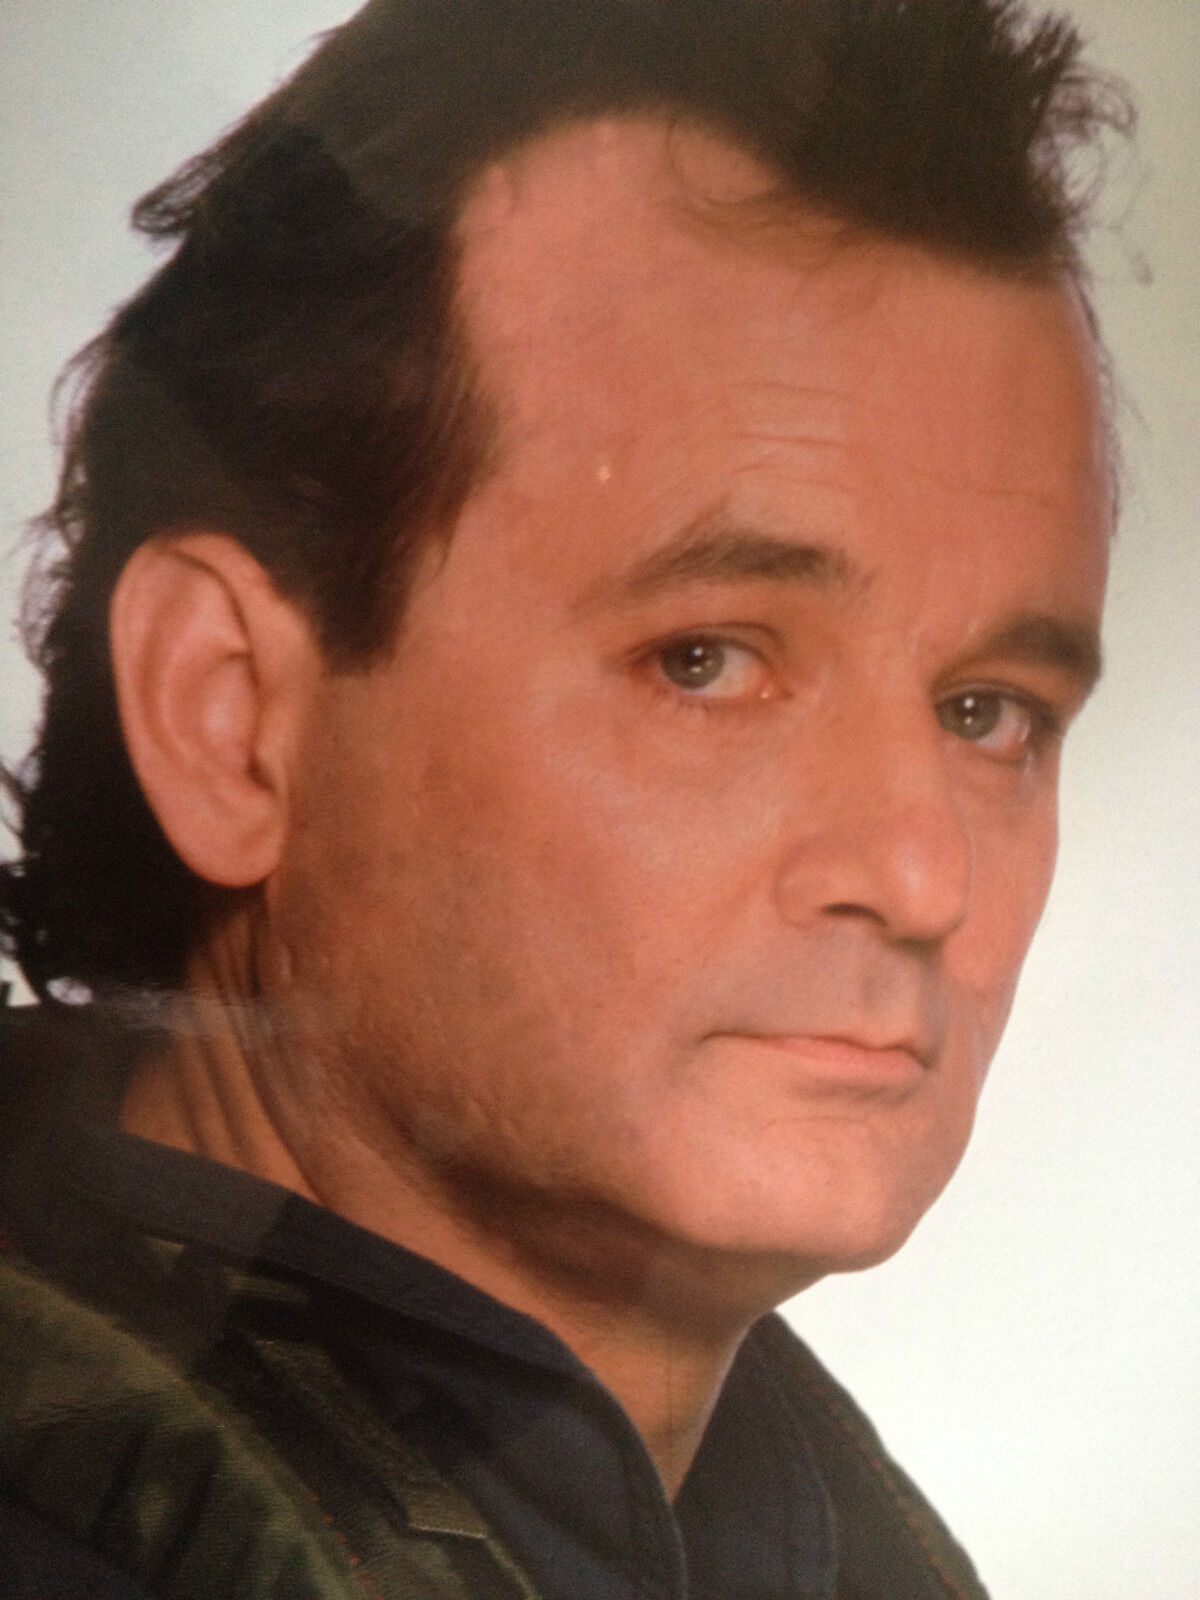 BILL MURRAY - GREAT ACTOR - SUPERB COLOUR Photo Poster paintingGRAPH